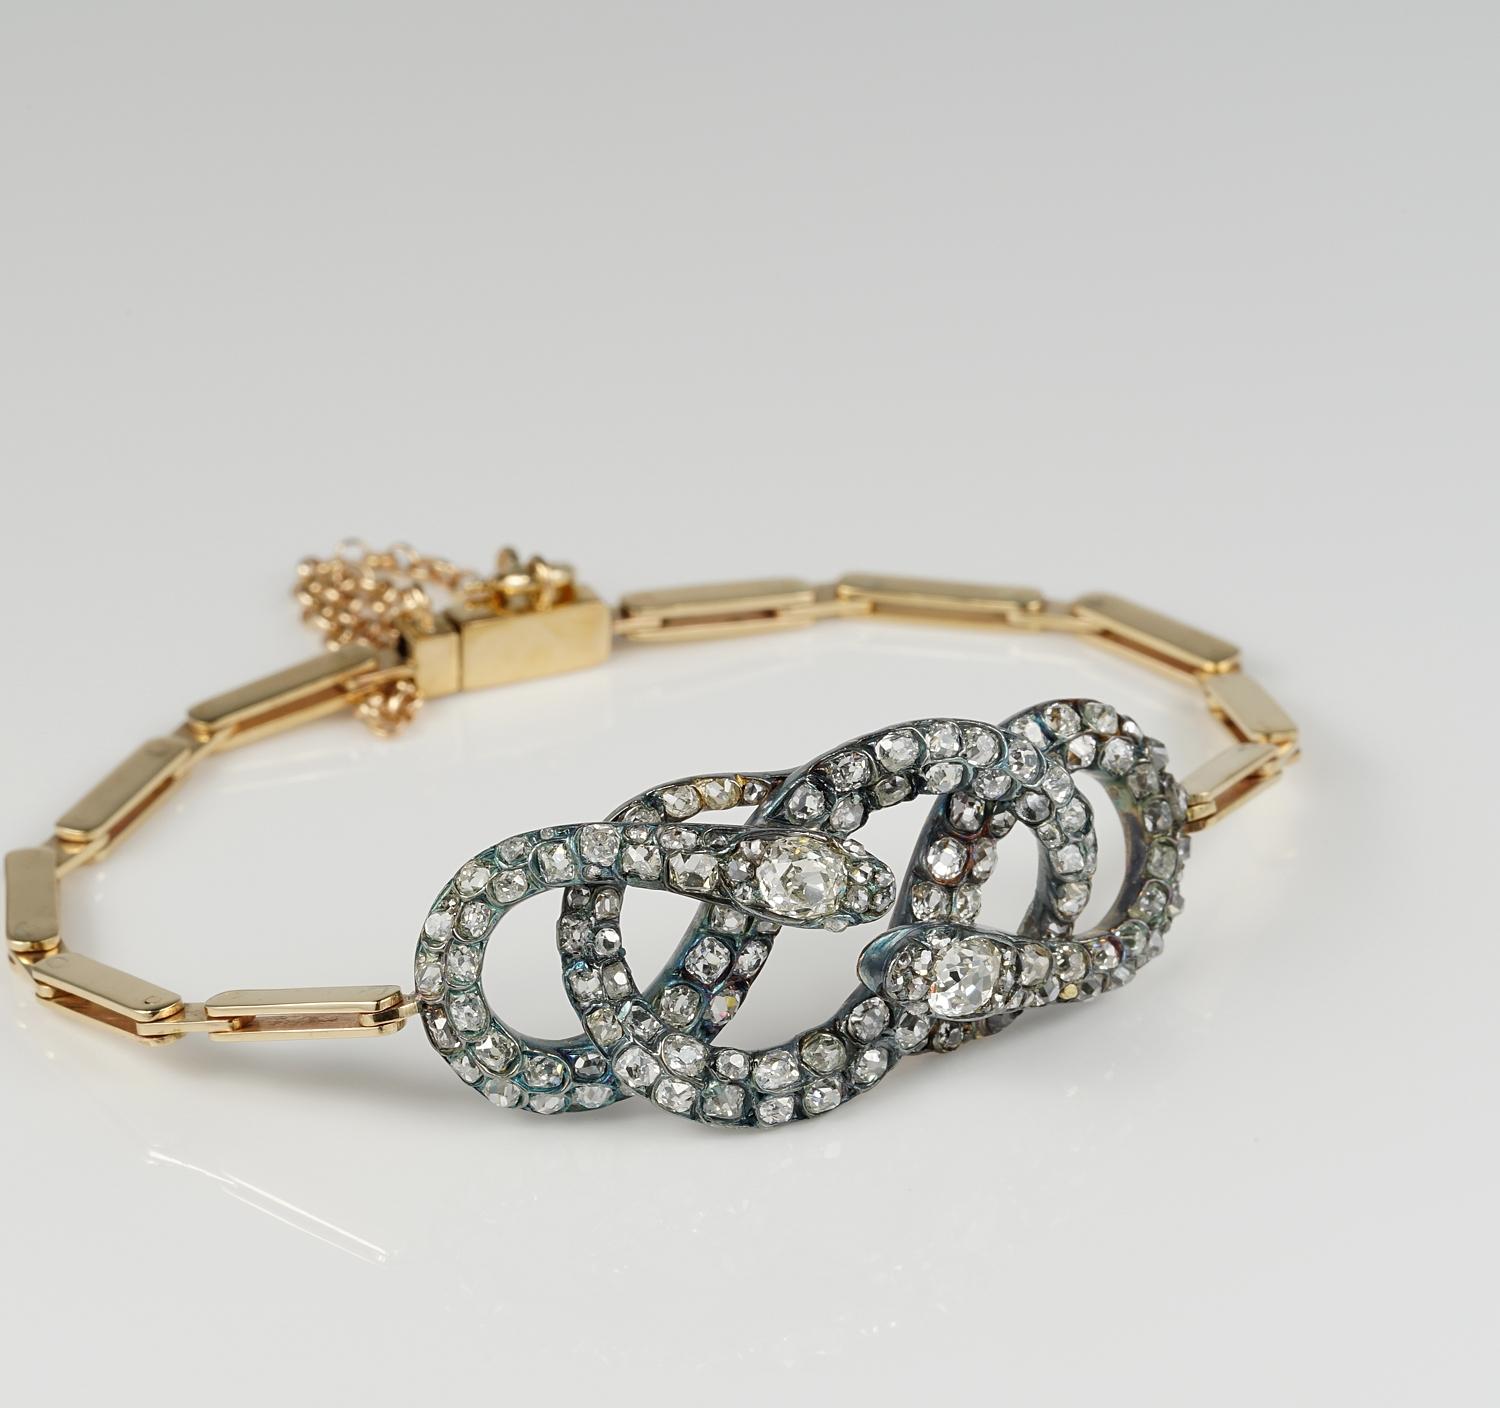 Antique 5.80 Carat Old Mine Cut Diamond Rare Coiled Snake Bracelet In Good Condition For Sale In Napoli, IT